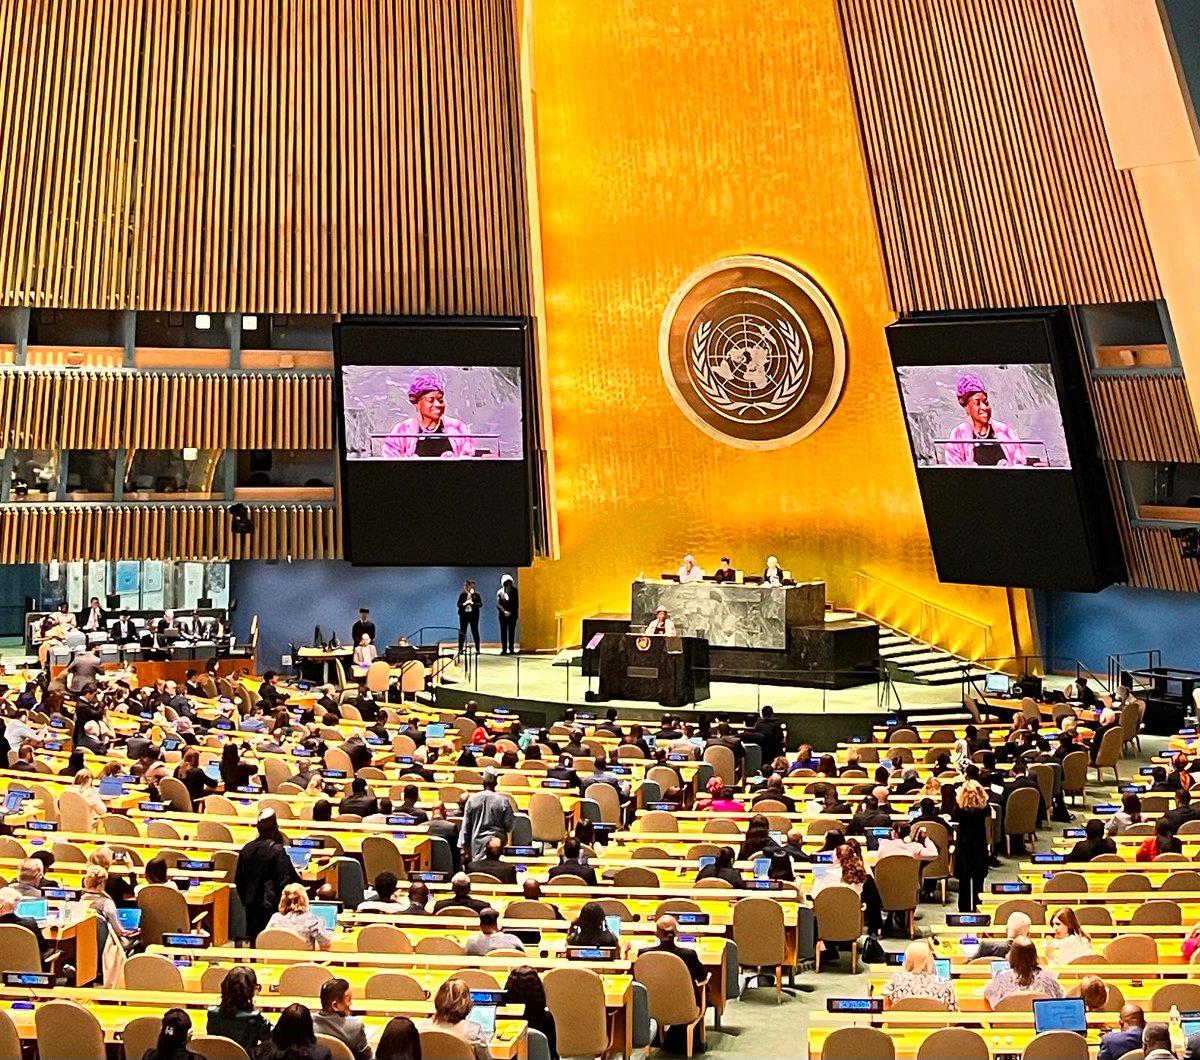 'We cannot sit still. When we invest in women and girls, everyone gains.' -@UNFPA Executive Director Dr. Natalia Kanem just now at the opening of #CPD57 on #ICPD30 in New York.